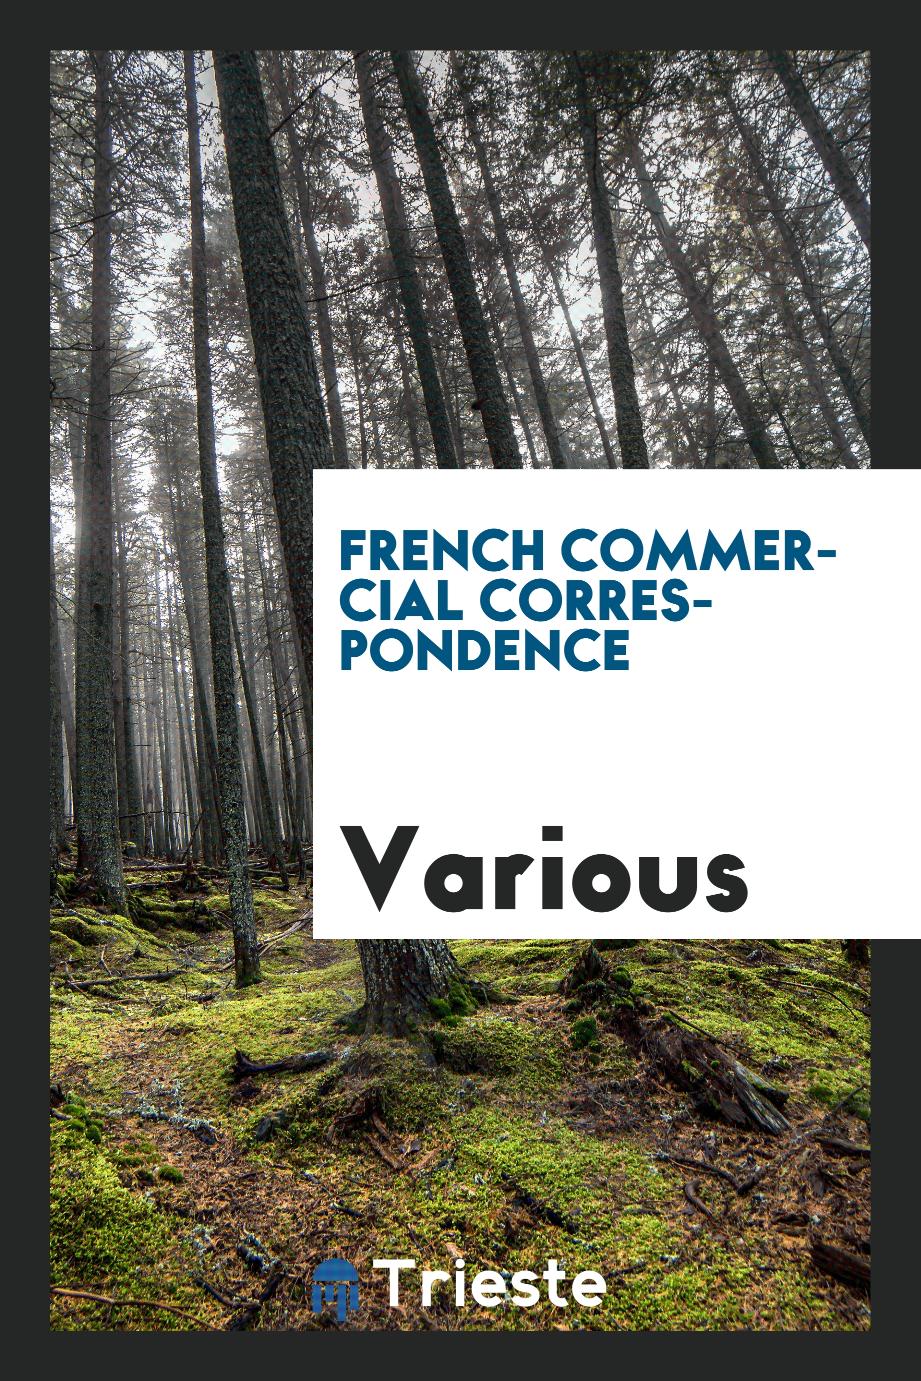 French commercial correspondence